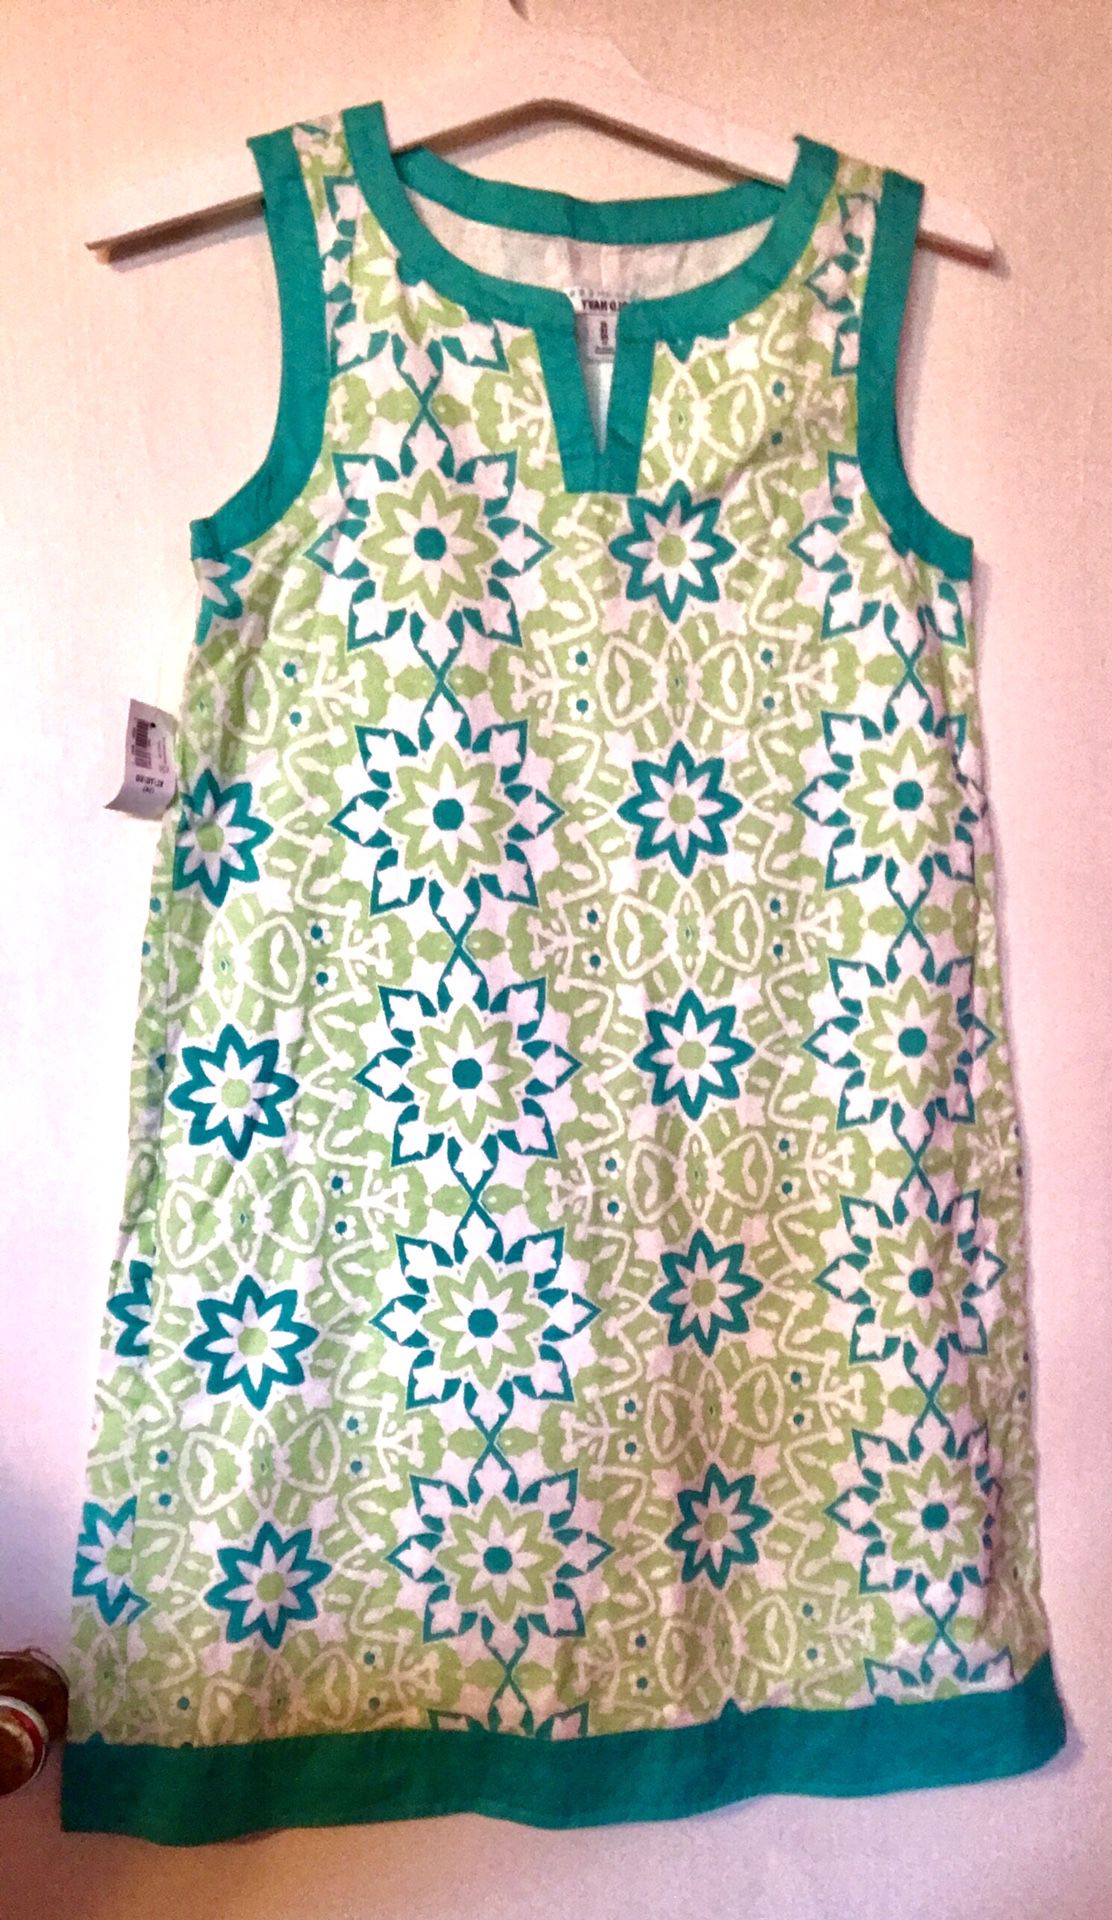 NWT GIRLS OLD NAVY SPRING  DRESS XL(16) Must See!!!